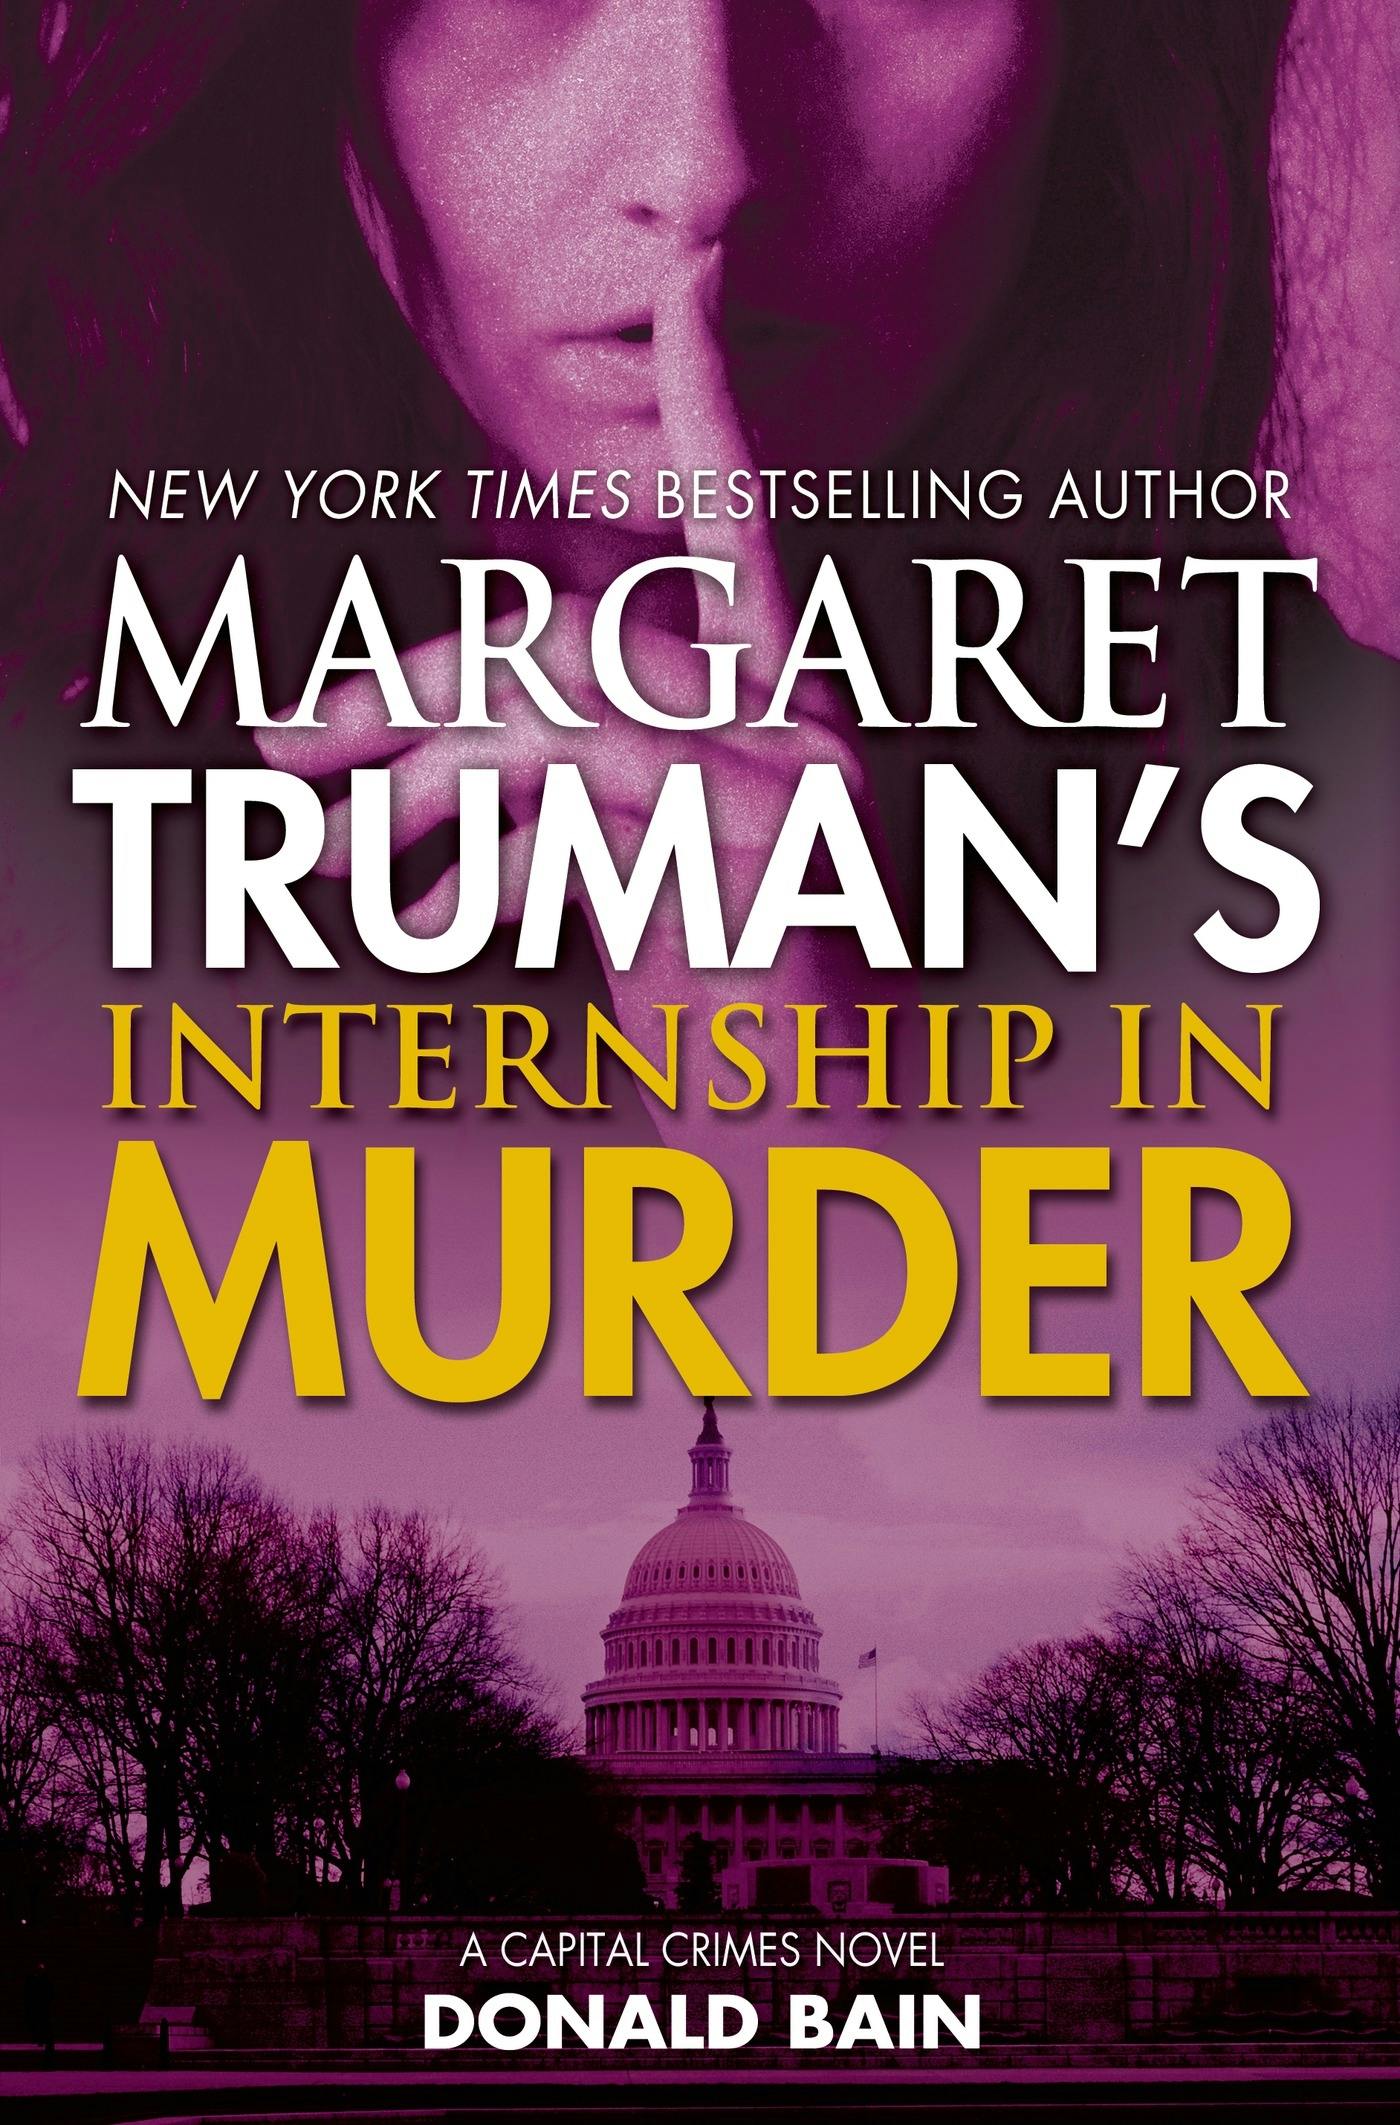 Cover for the book titled as: Margaret Truman's Internship in Murder